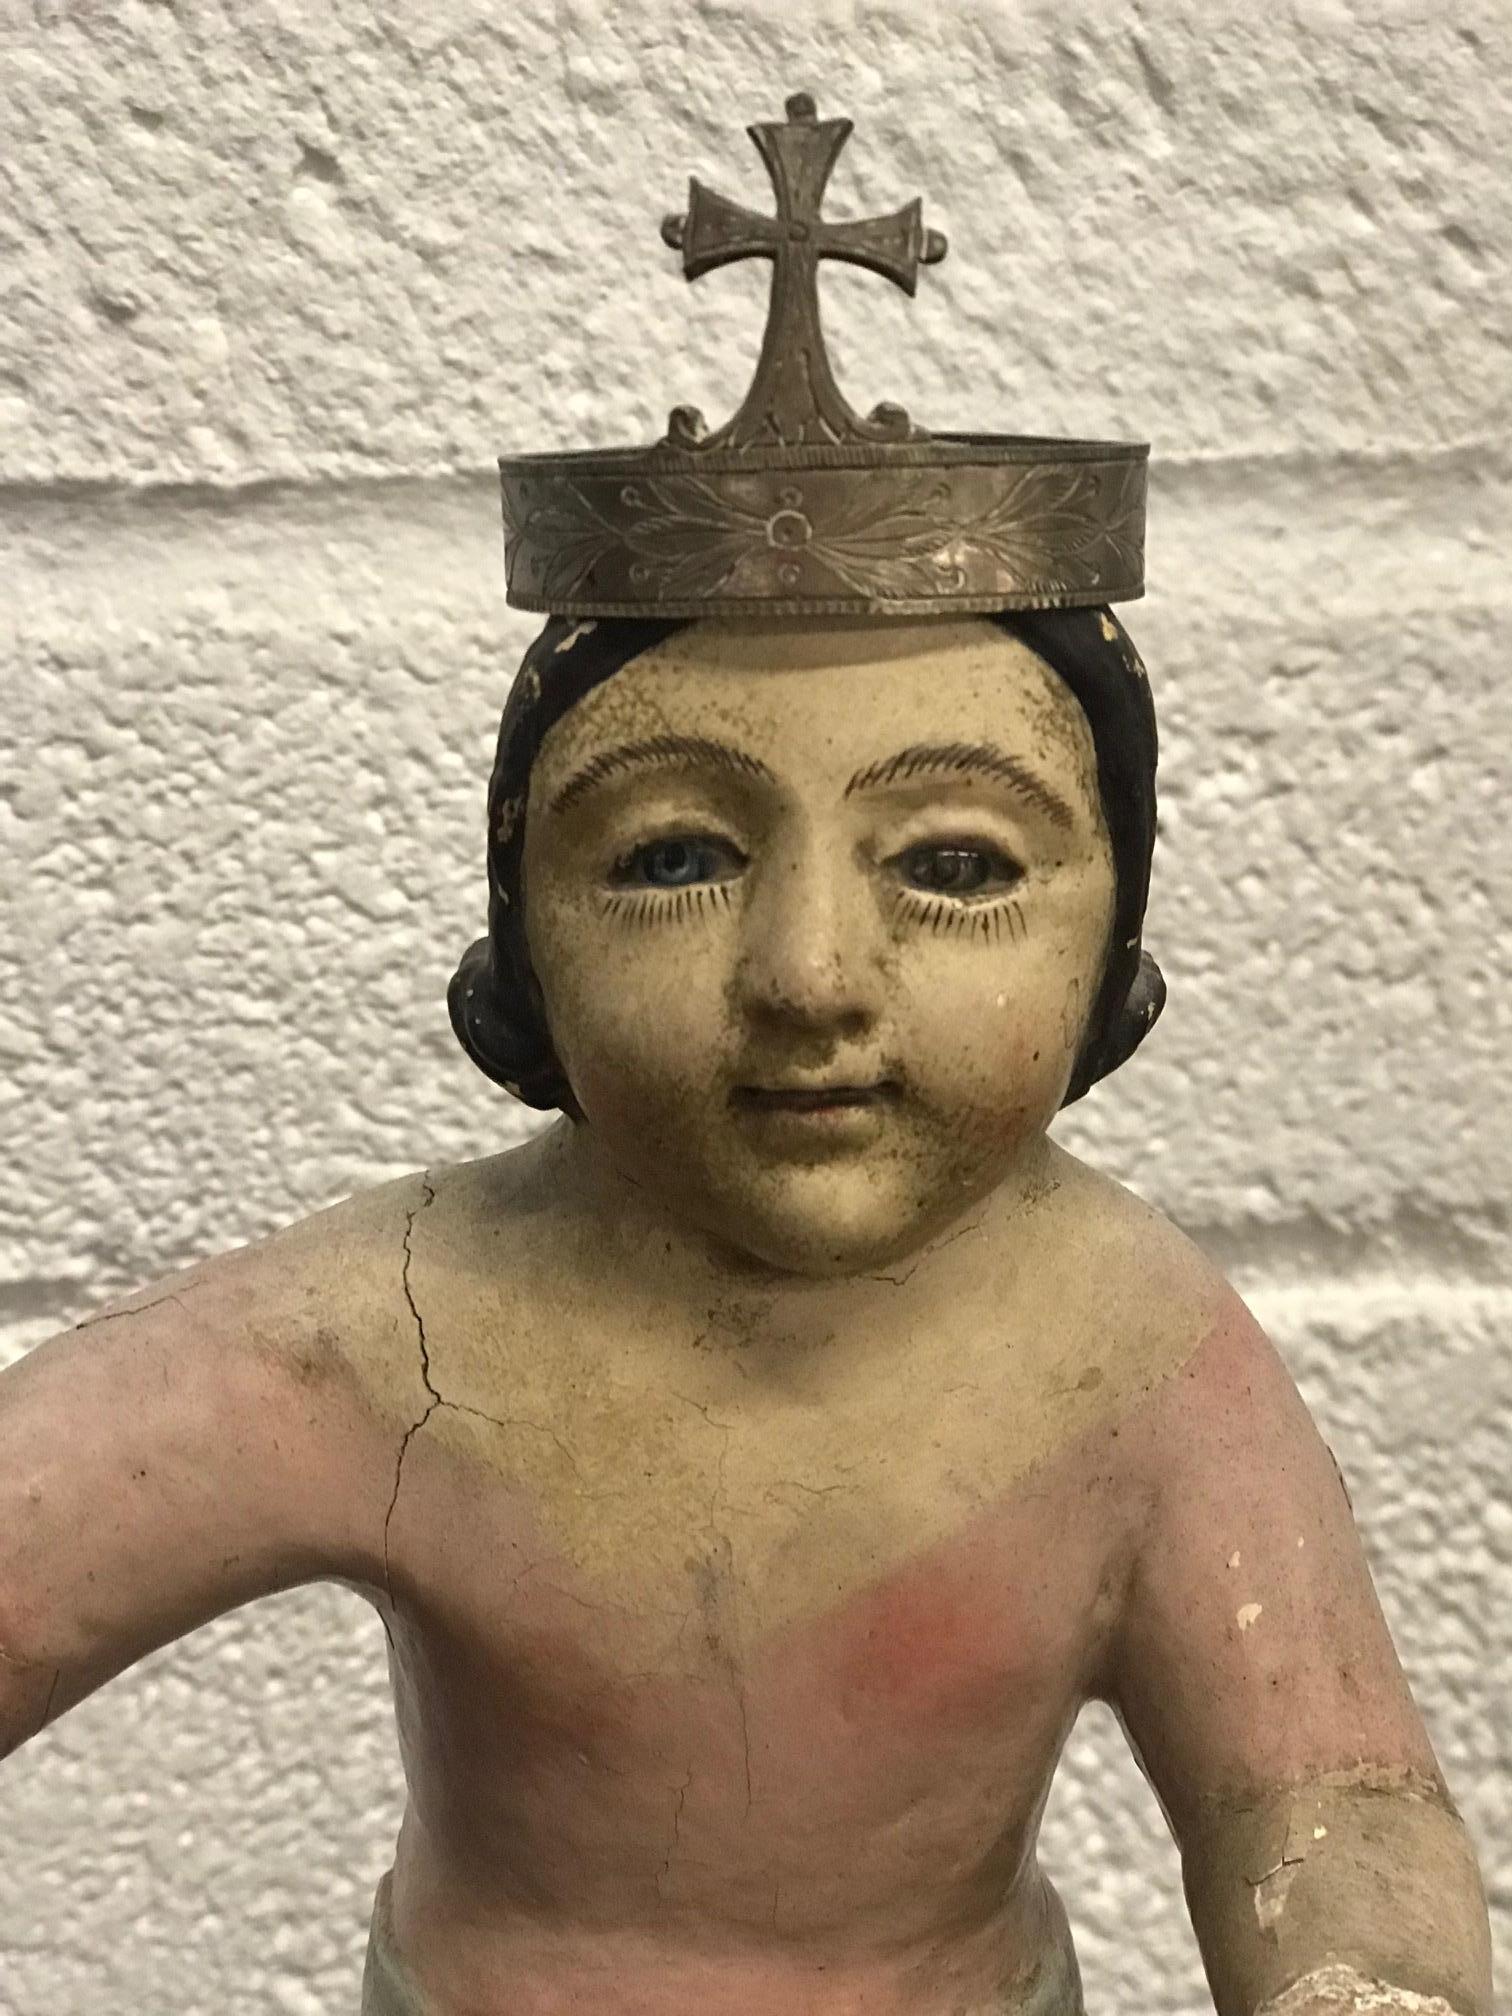 Beautifully carved and sculptured polychrome nino. Glass eyes. Has a metal crown that sits on his head but is not the original. We believe that he held a staff in one hand and a globe in the other. Some missing fingers. He shows signs of his age,